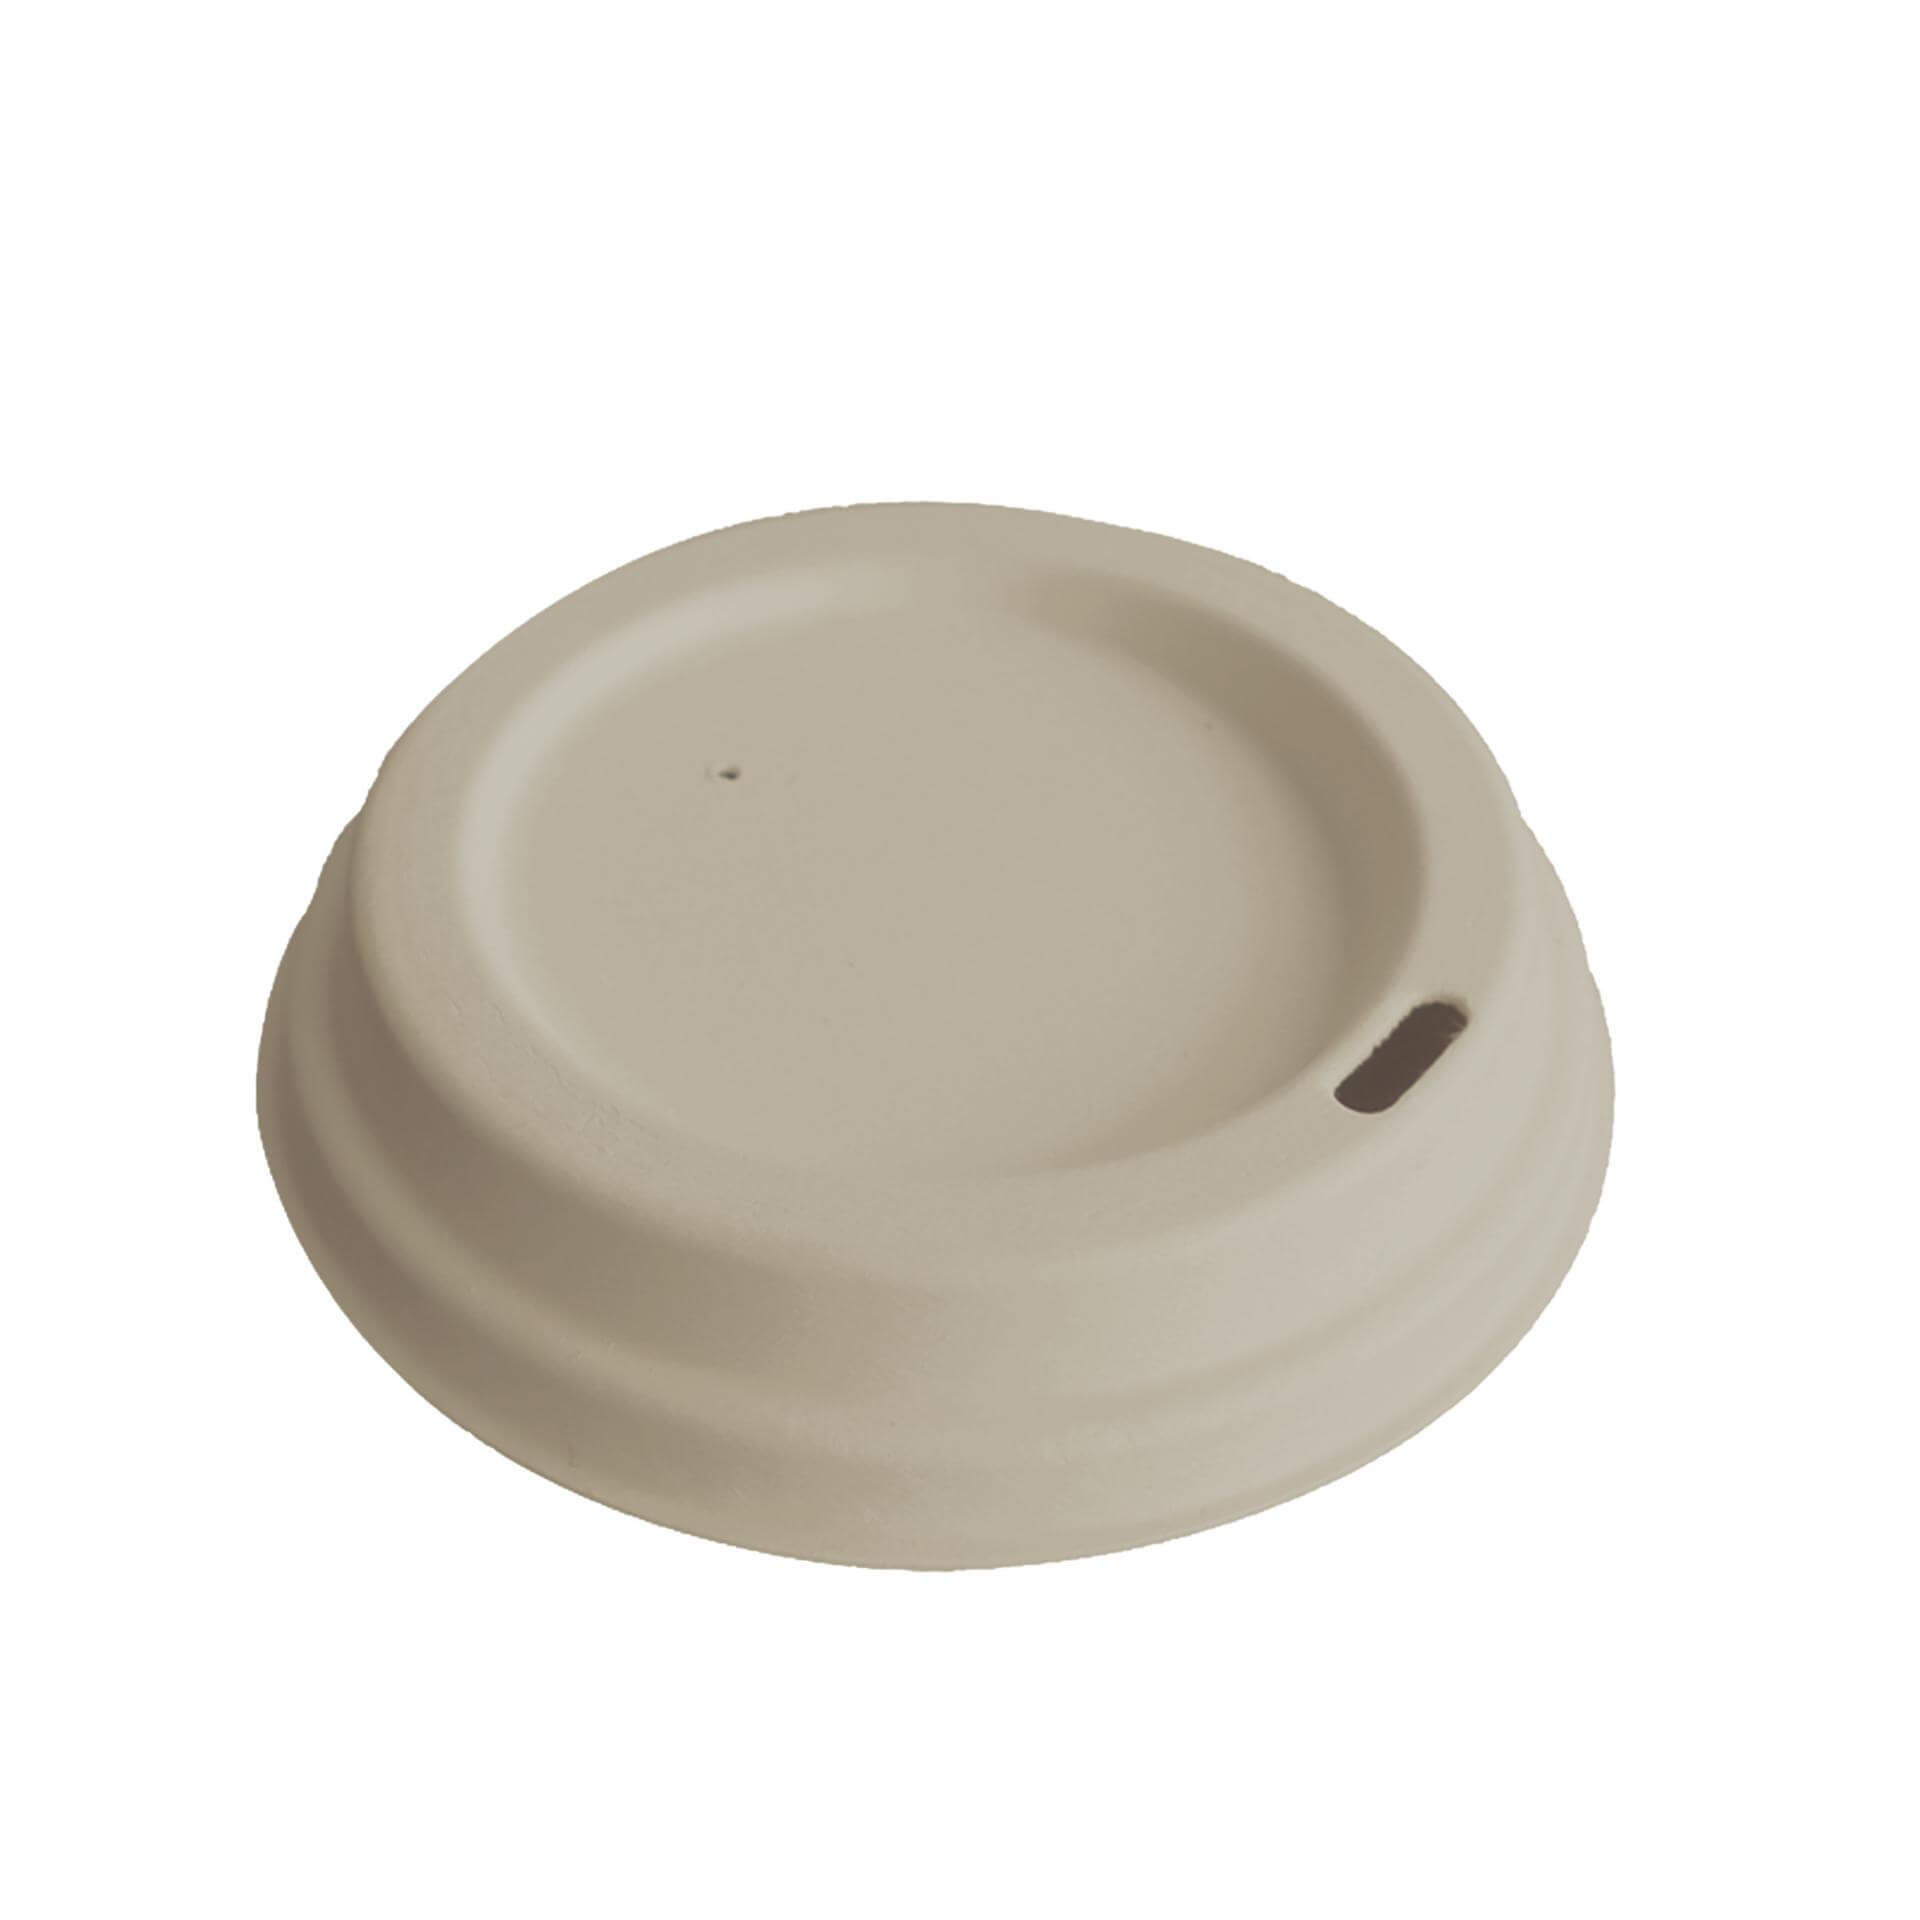 90mm paper sip lids for coffee